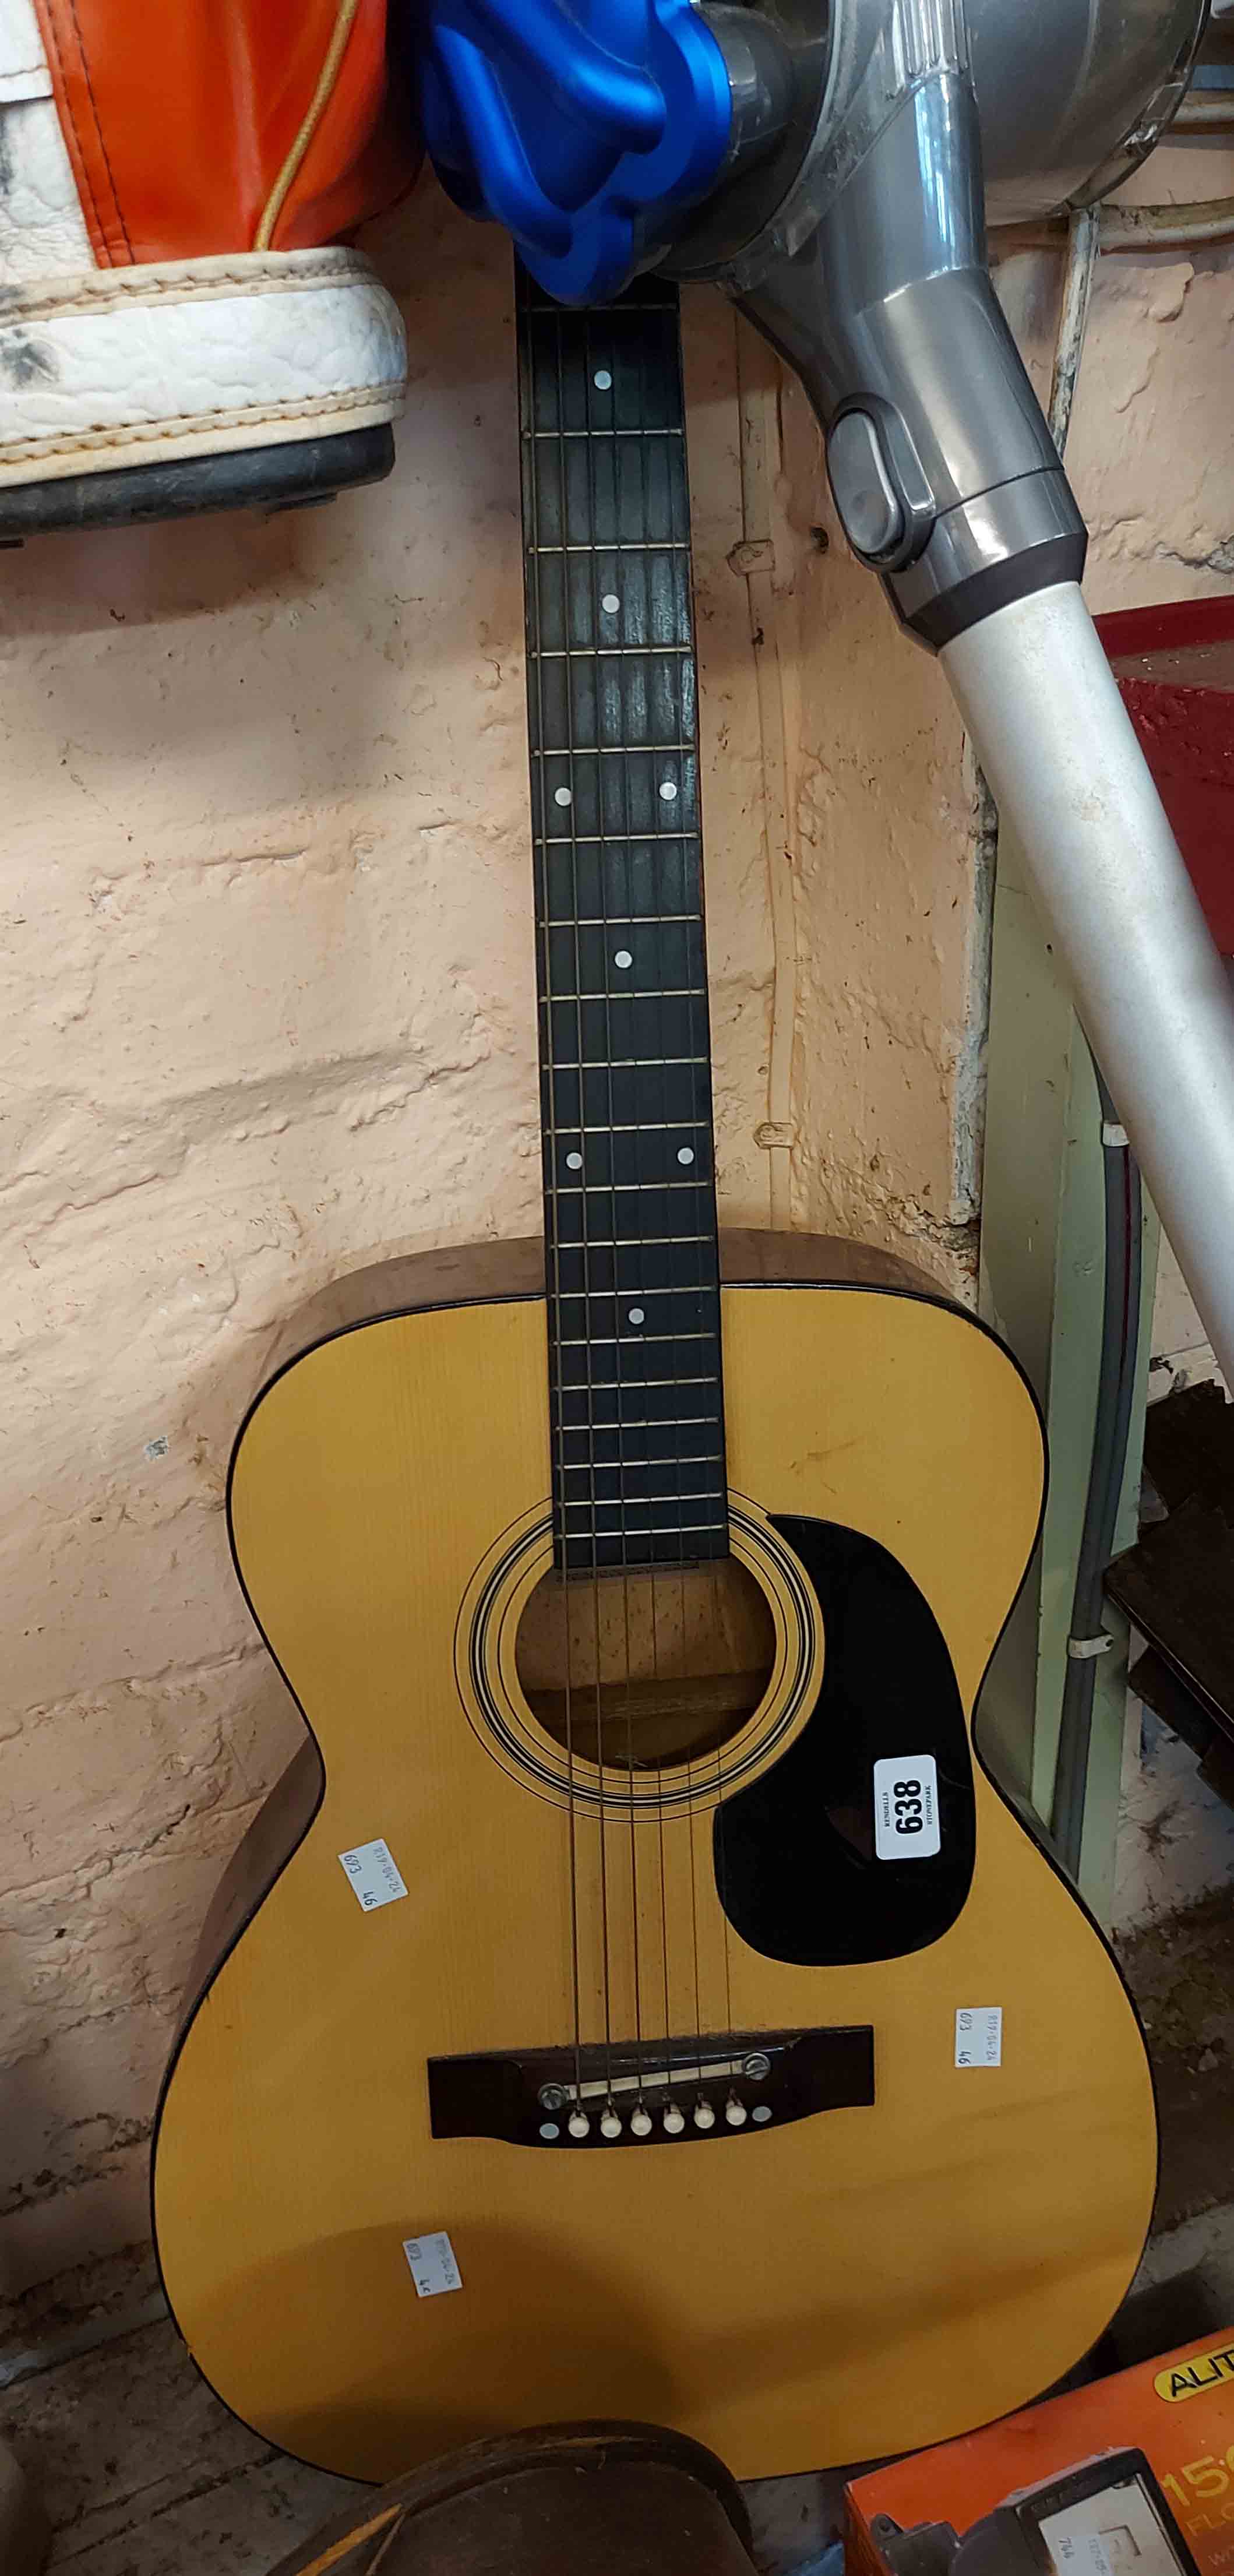 A vintage Kay small body acoustic guitar